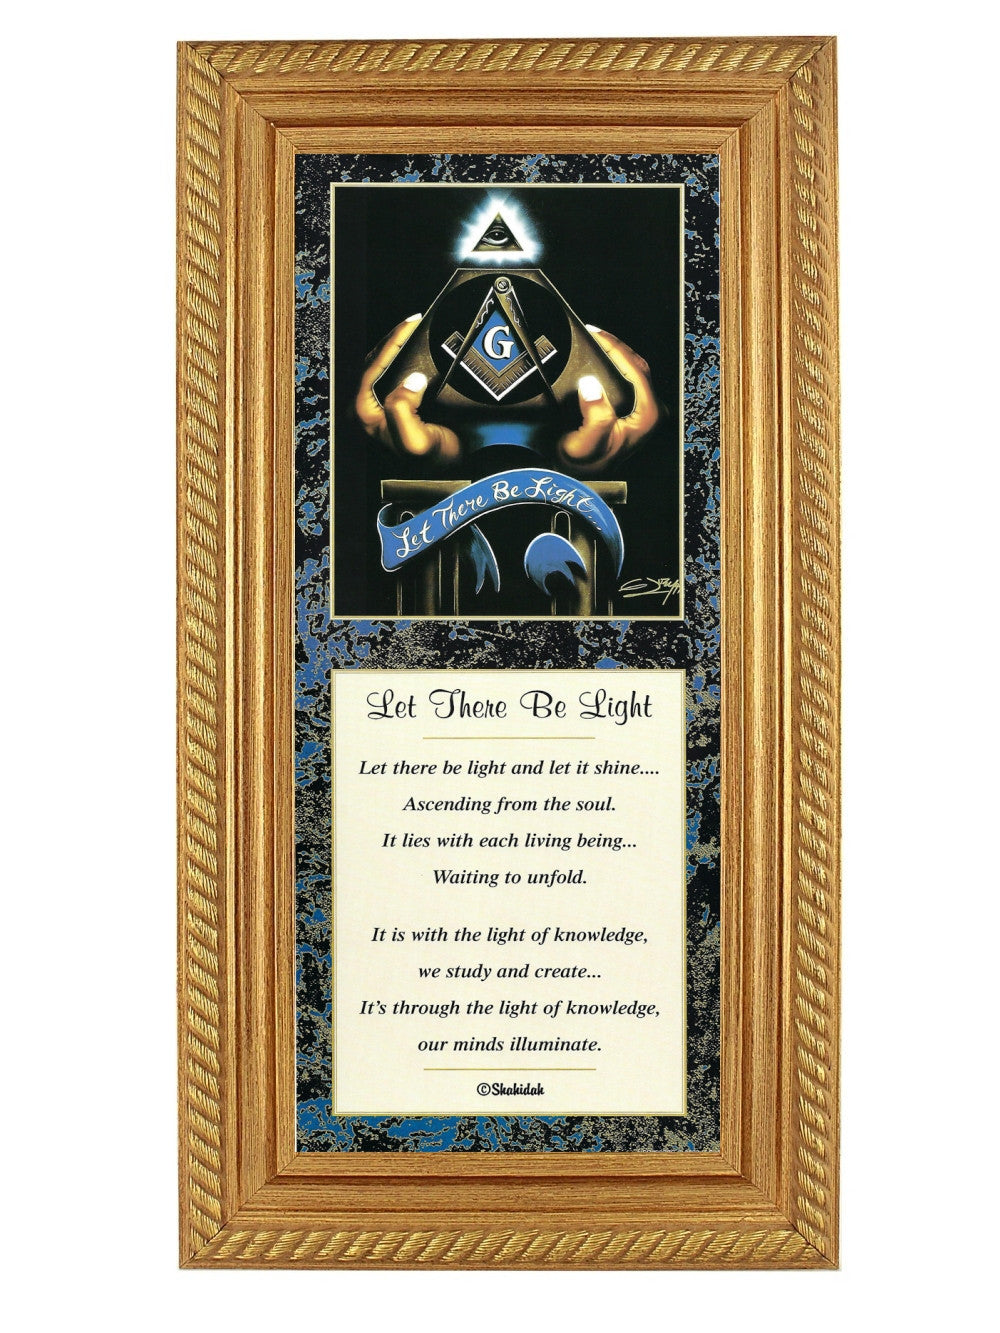 Let There Be Light (Freemasonry) by Gerald Ivey and Shahidah (Gold Frame)